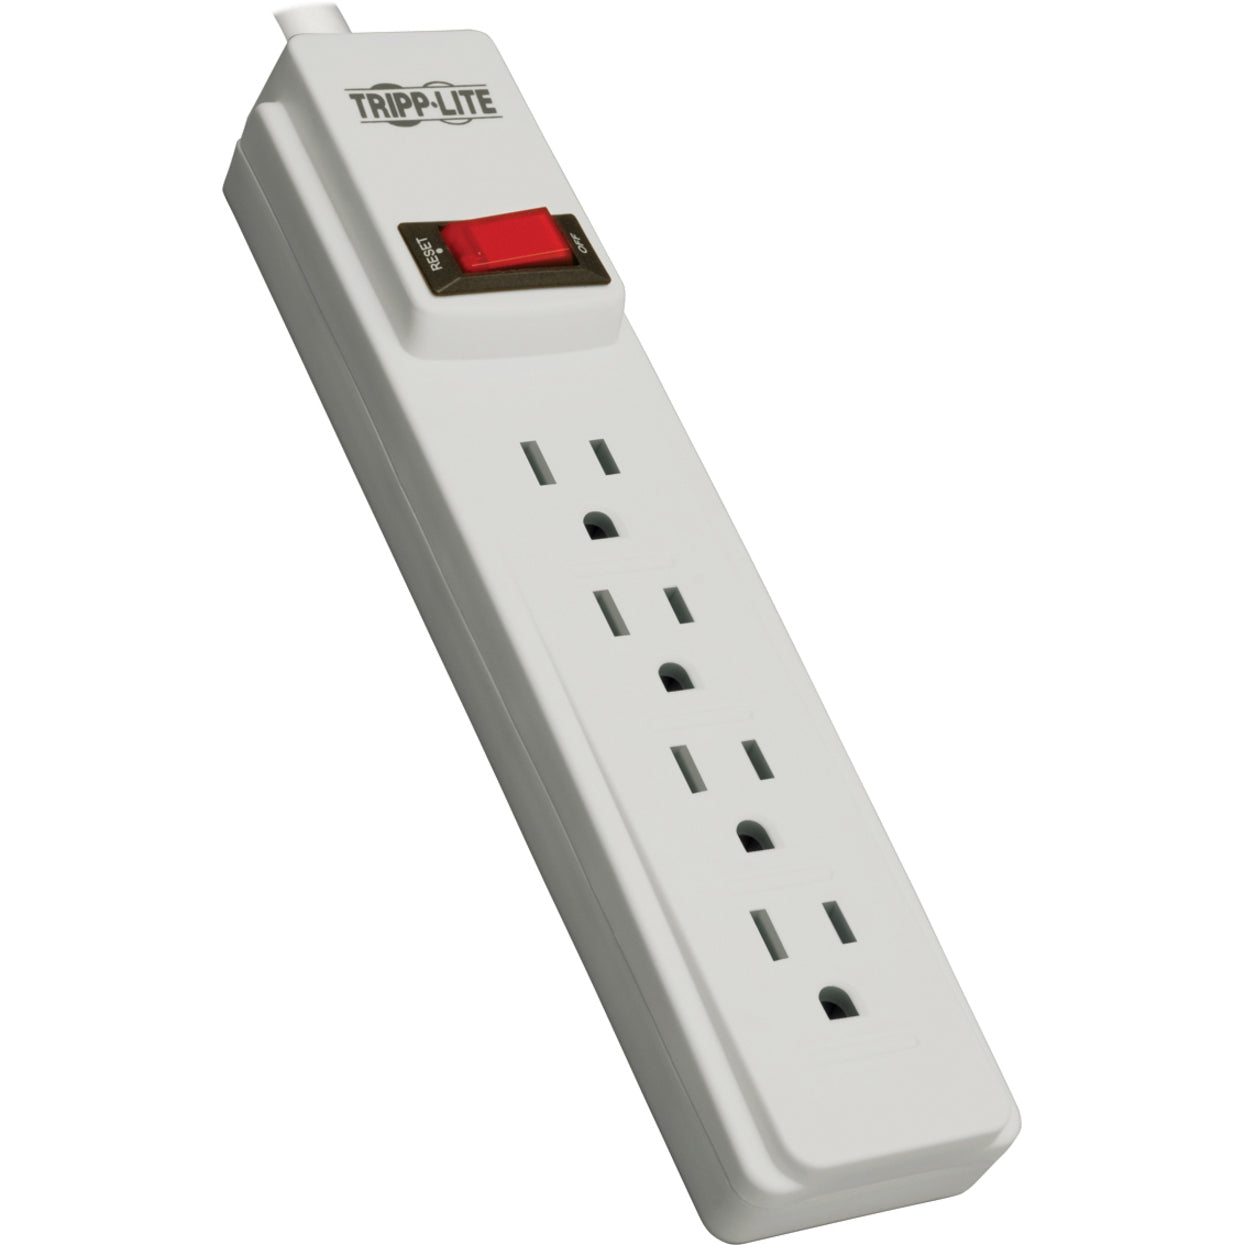 Tripp Lite PS410 Power It! Power Strip with 4 Outlets and 10-ft. Cord, 1800W, 120V AC